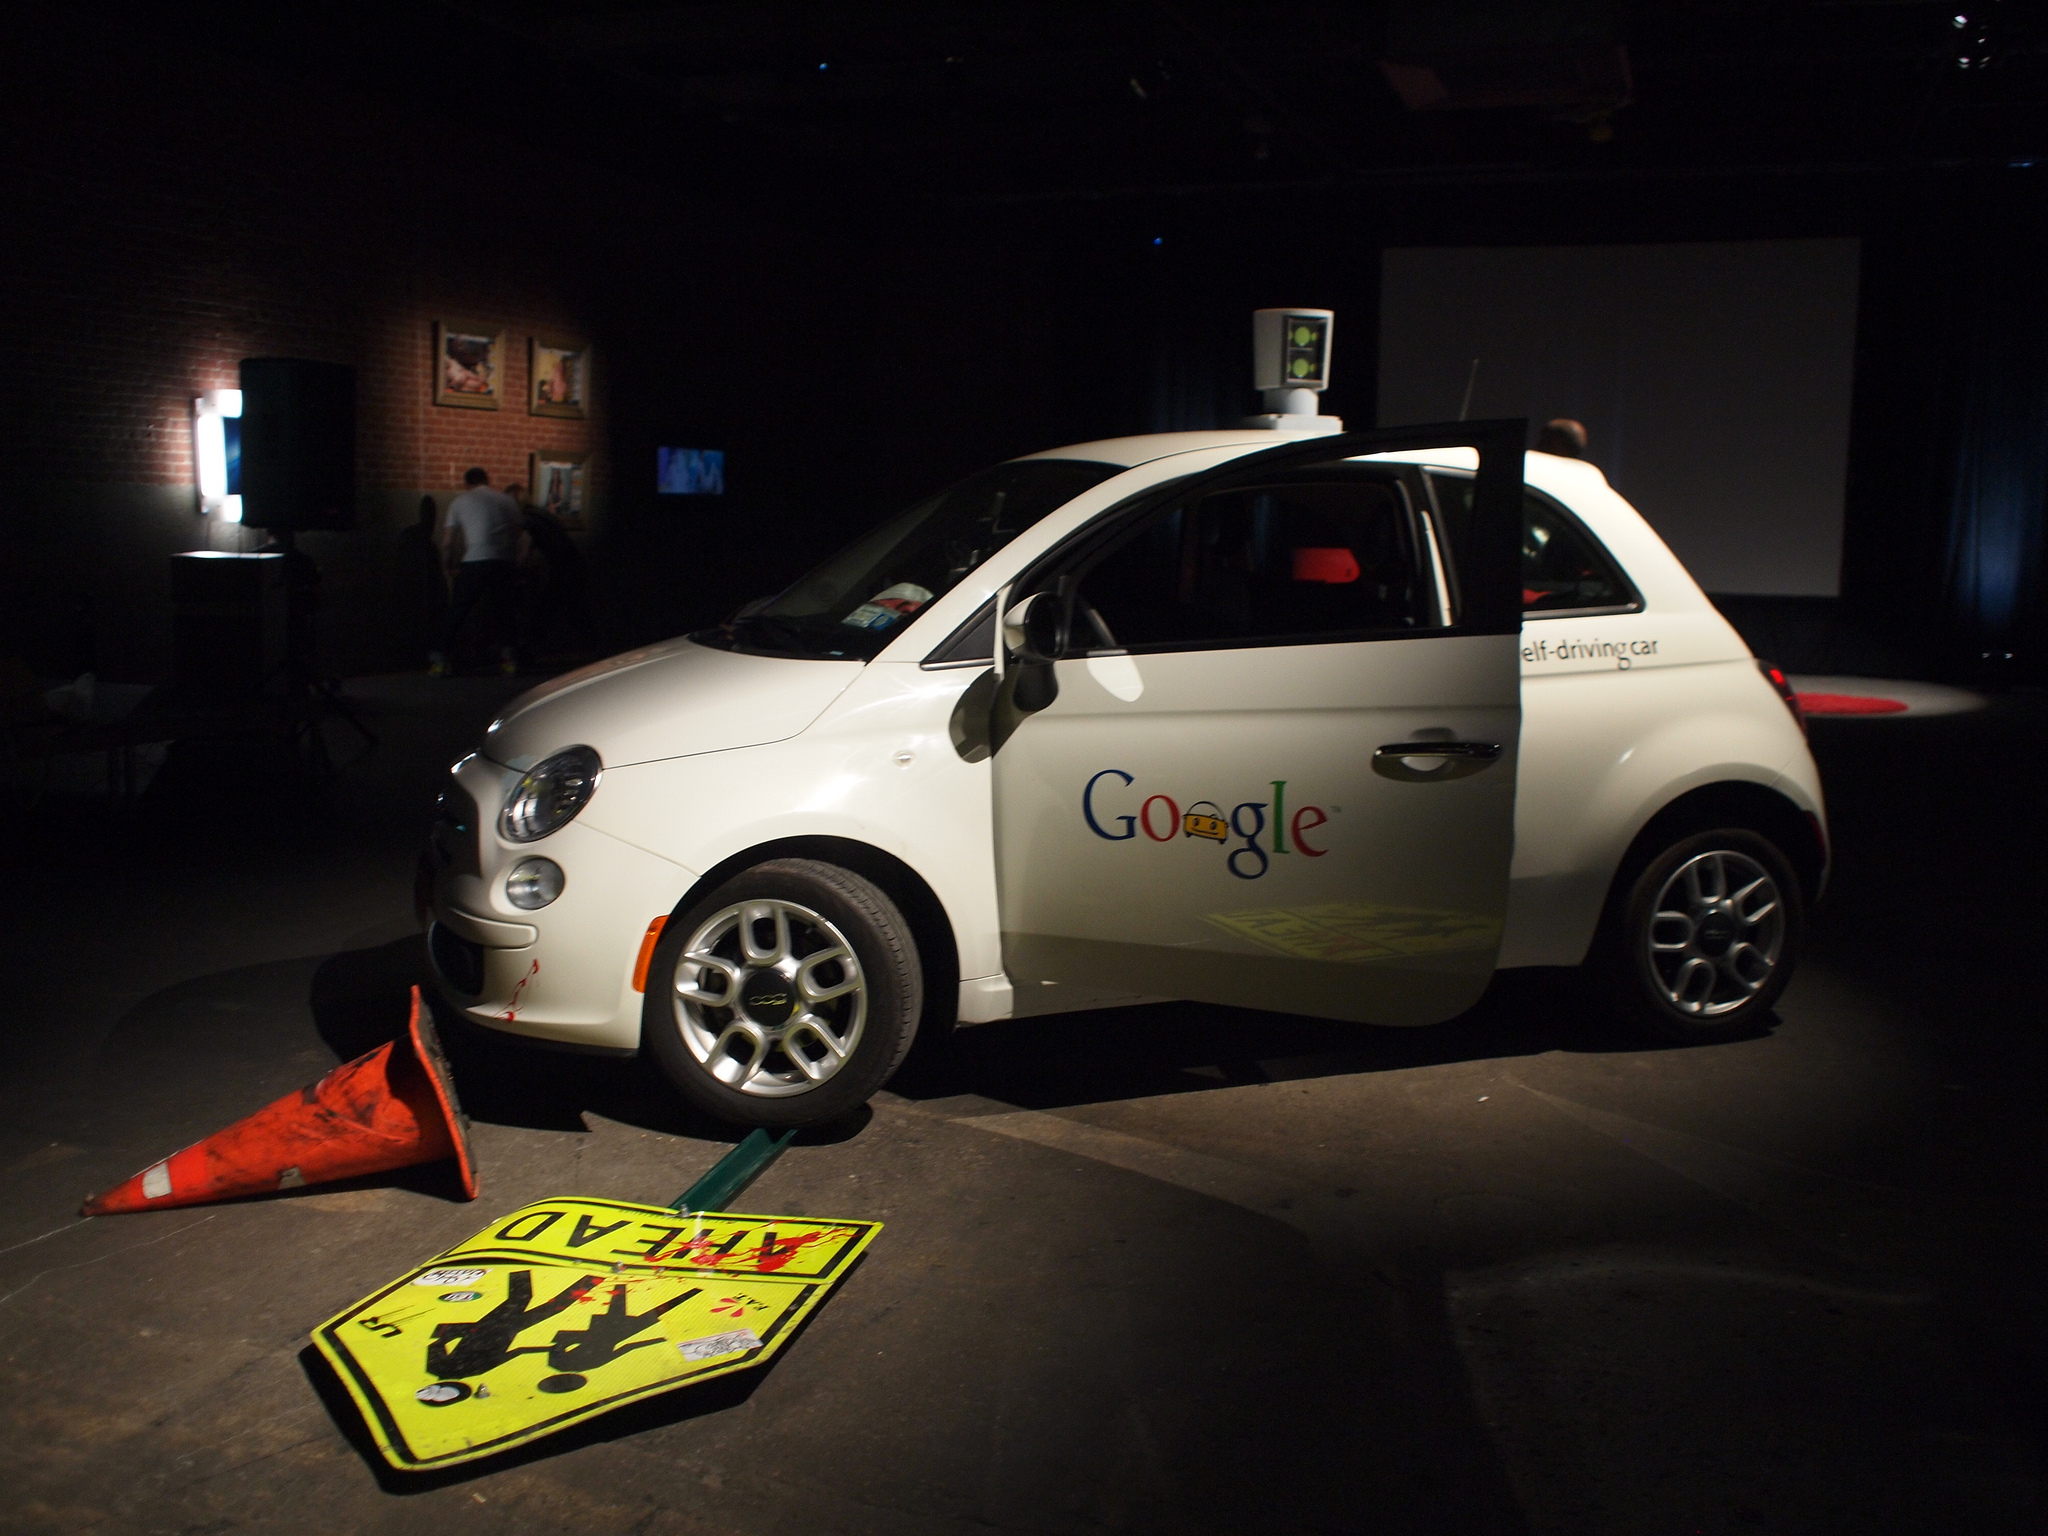 A Look Down the Road at the Future of Automated Cars